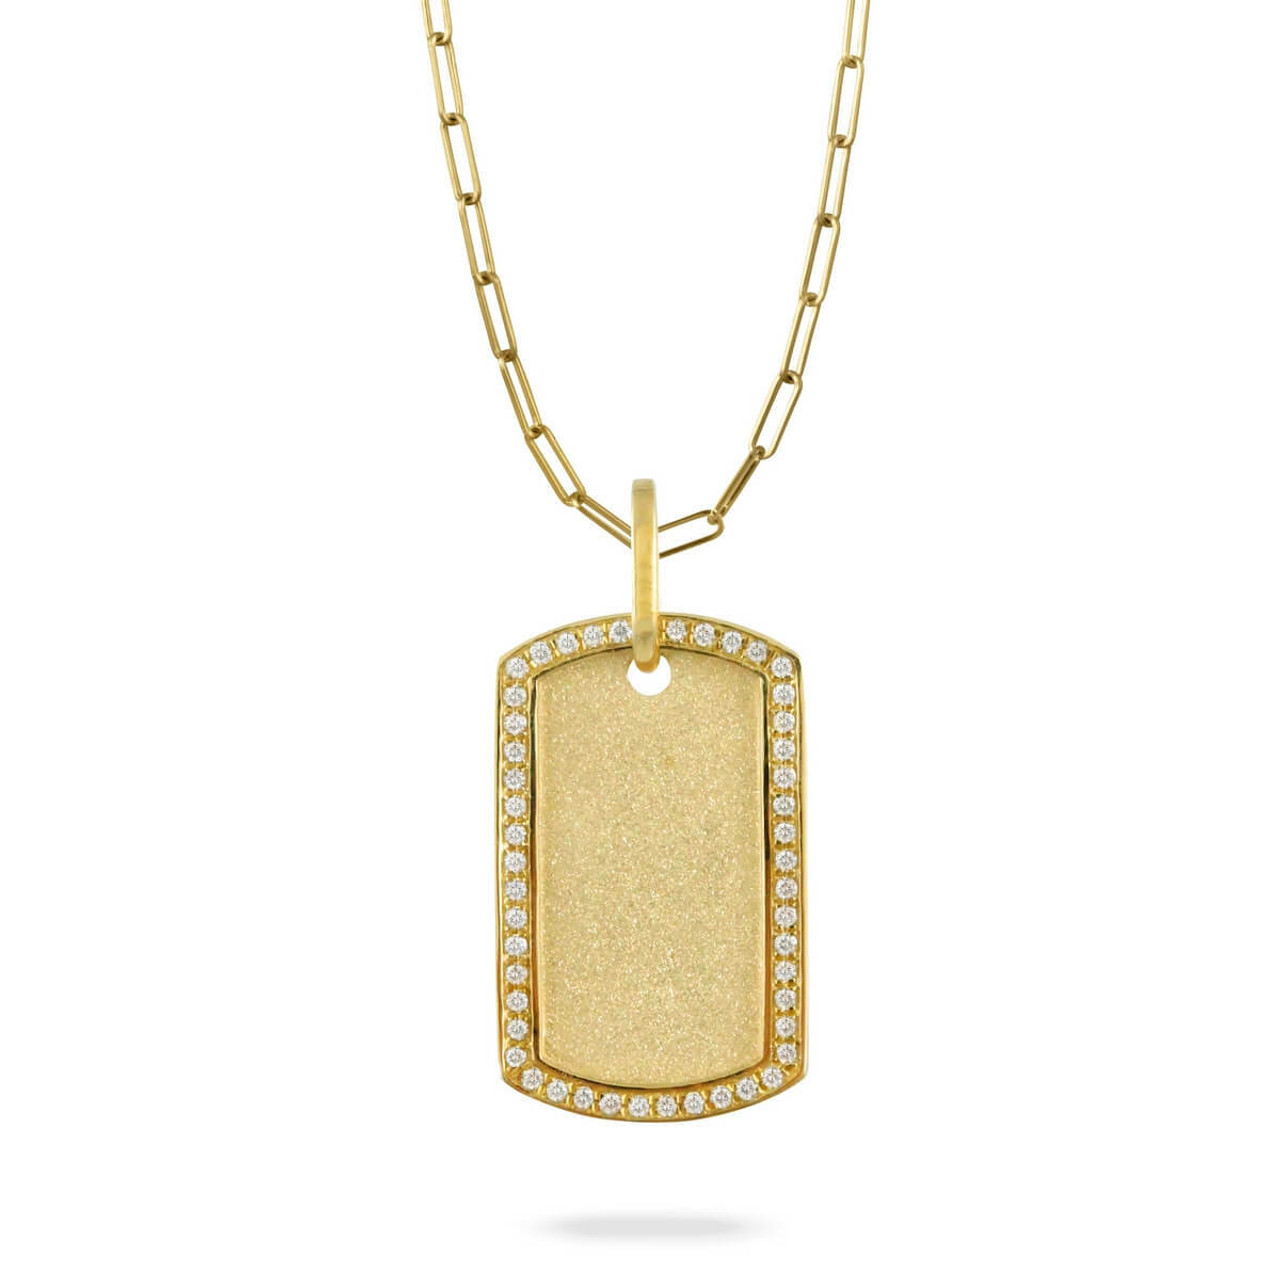 Doves by Doron Paloma Diamond Dog Tag Yellow Gold Pendant | Giving Tree Gallery